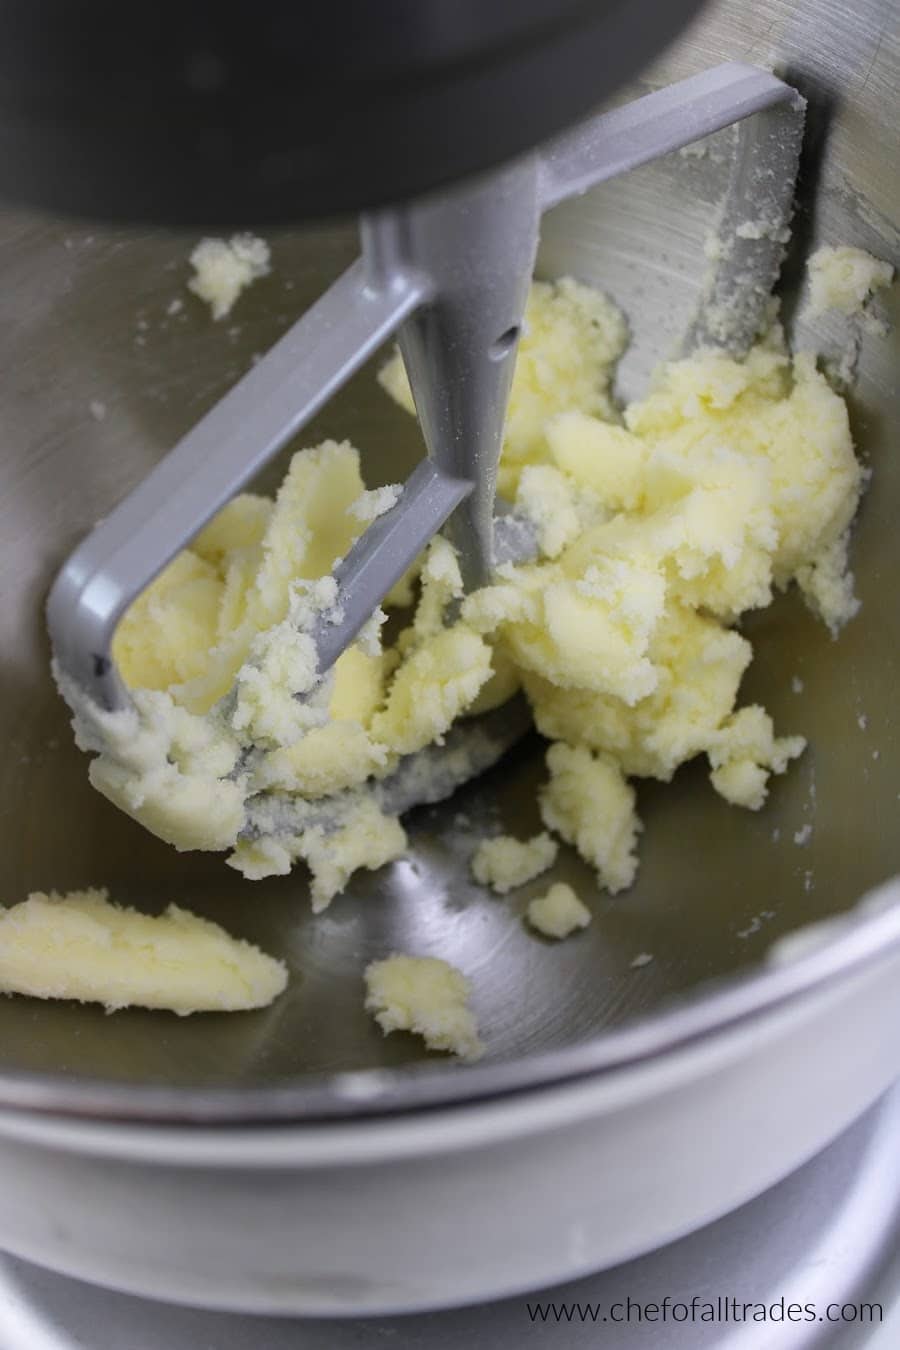 butter and gentle sweet together in the mixing bowl